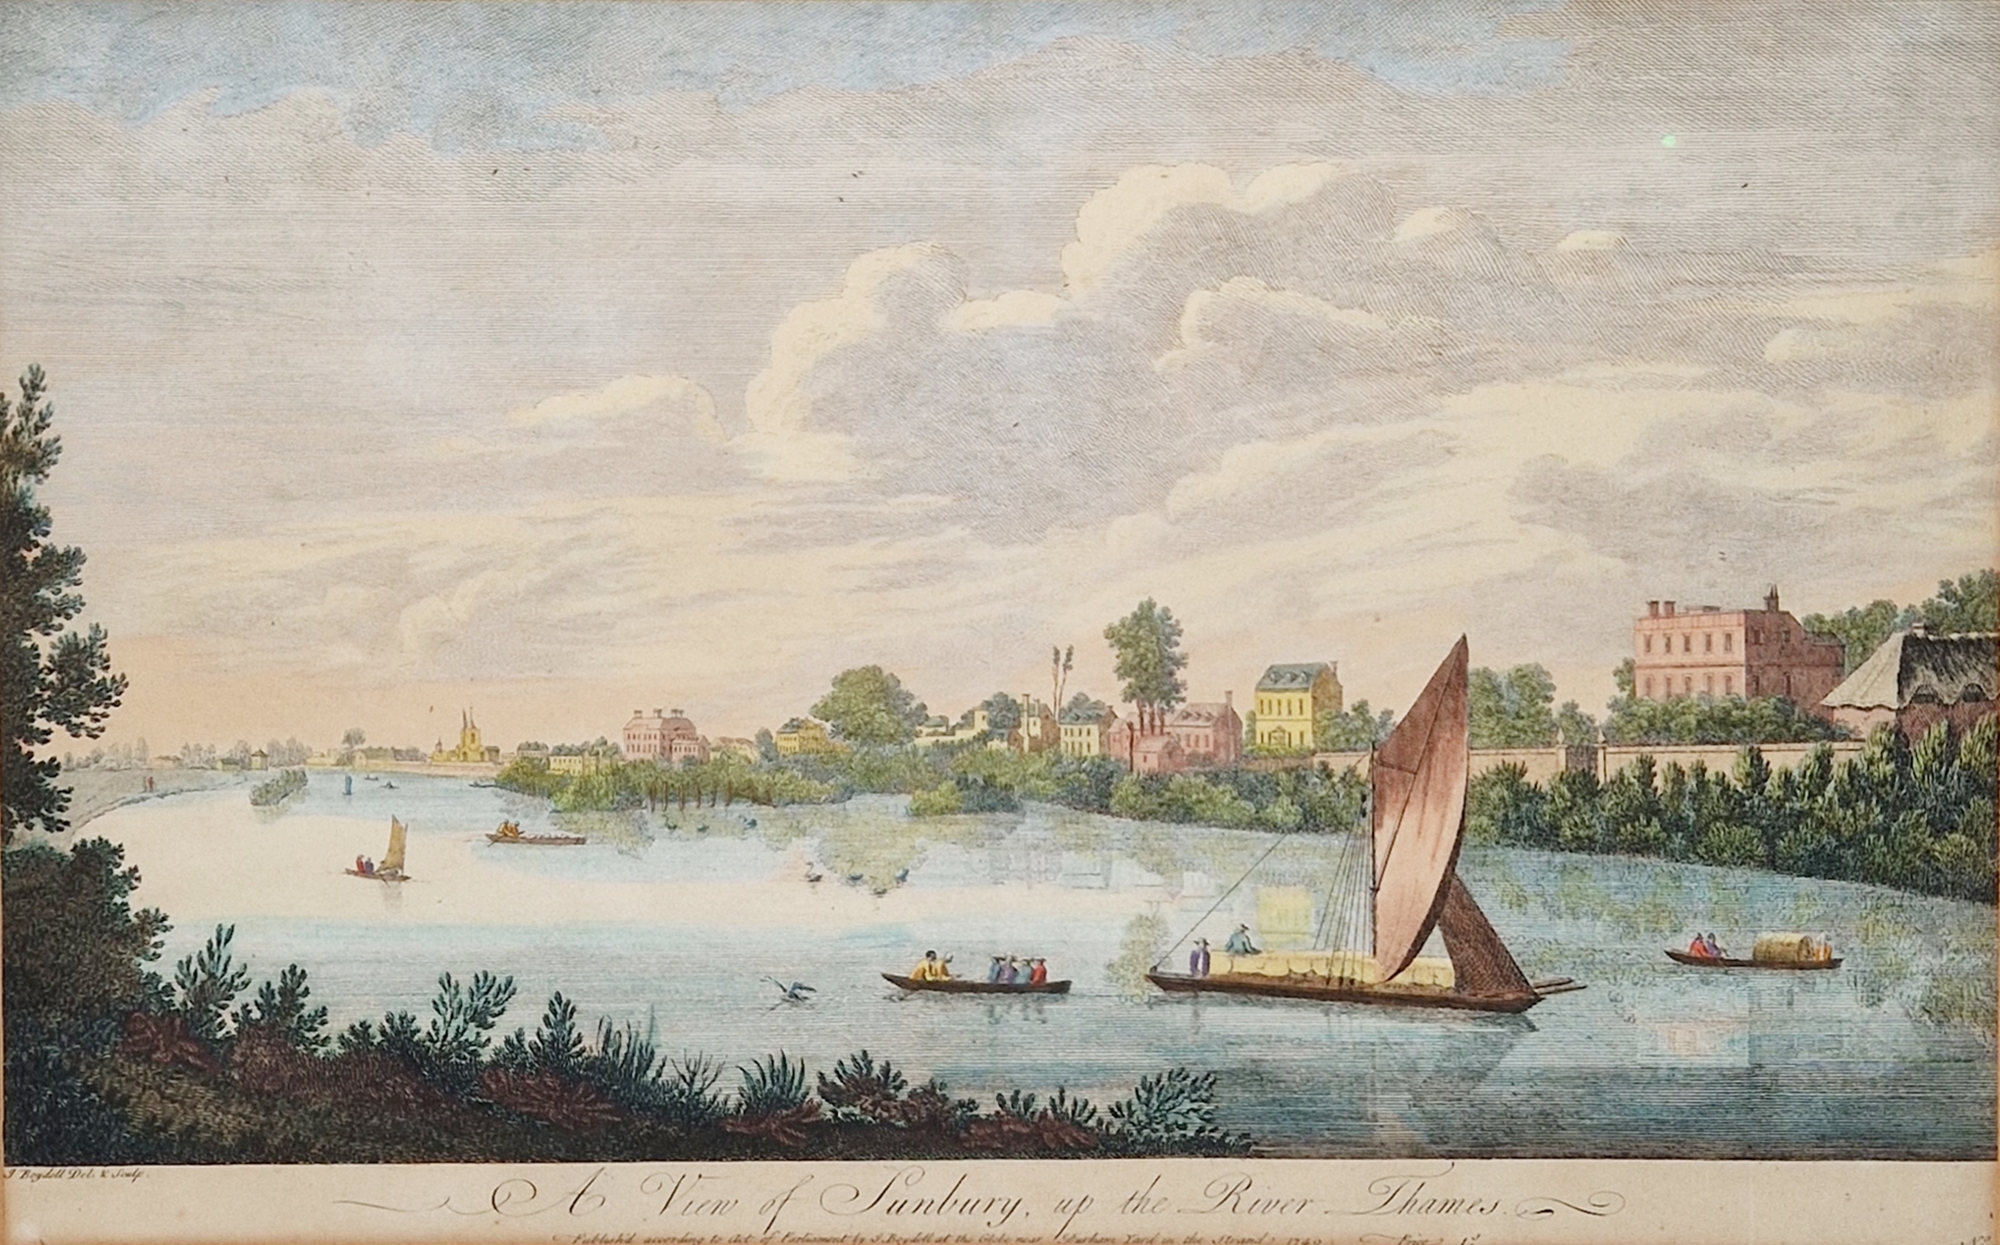 J Boydell Handcoloured engraving  "View of Shepperton", depicting horses and figures by the river,